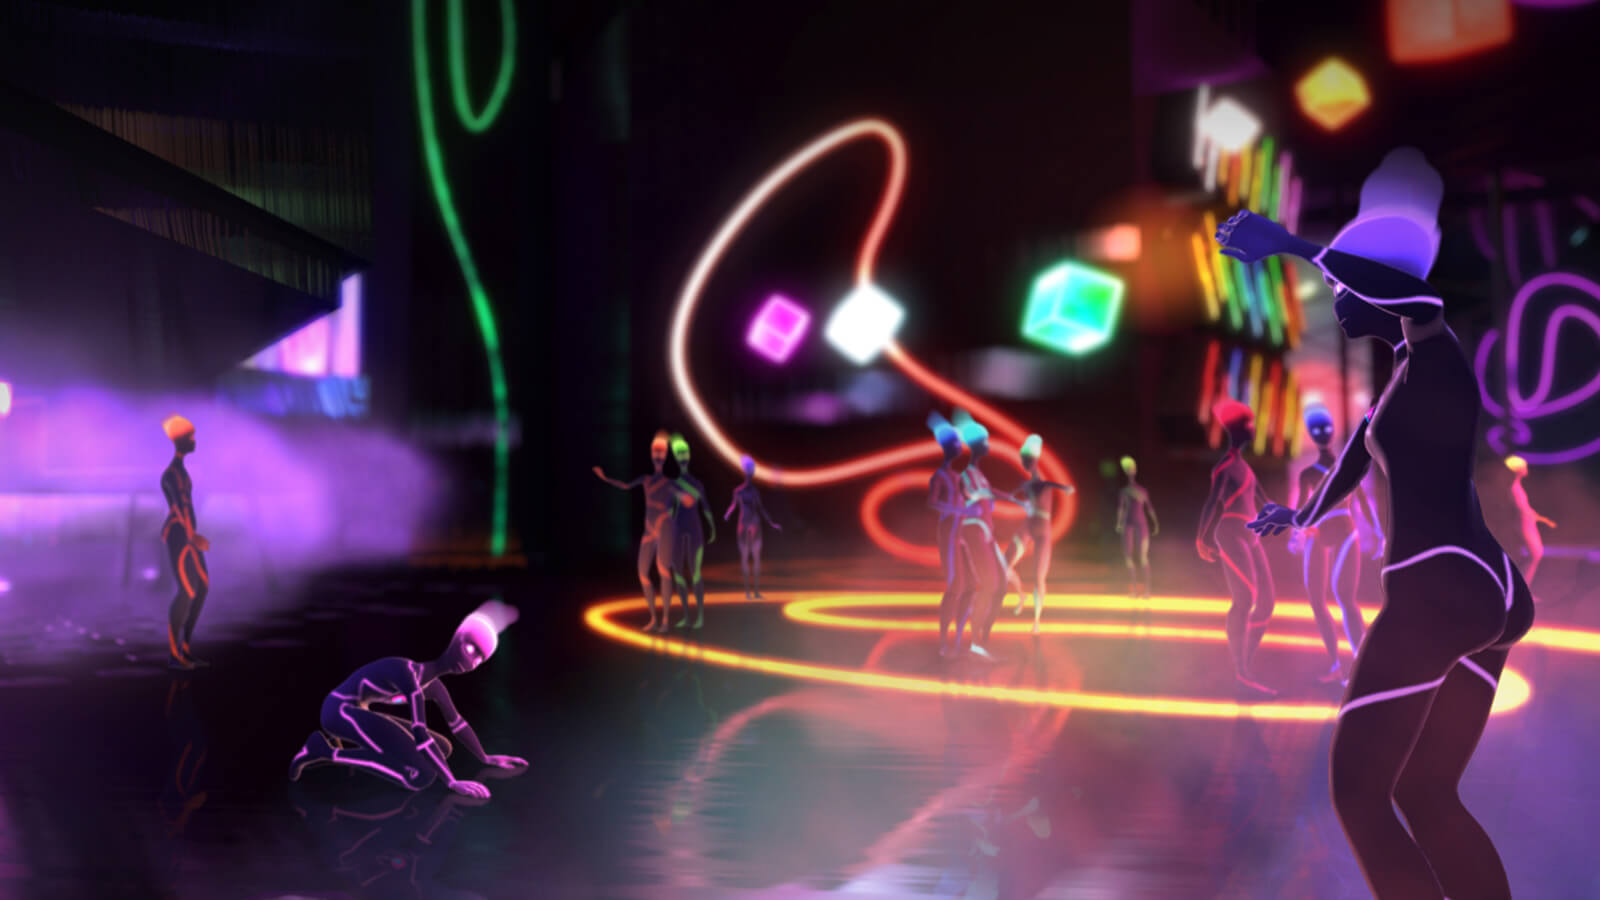 Characters with neon-colored features mingle around a nightclub while one figure falls to its knees